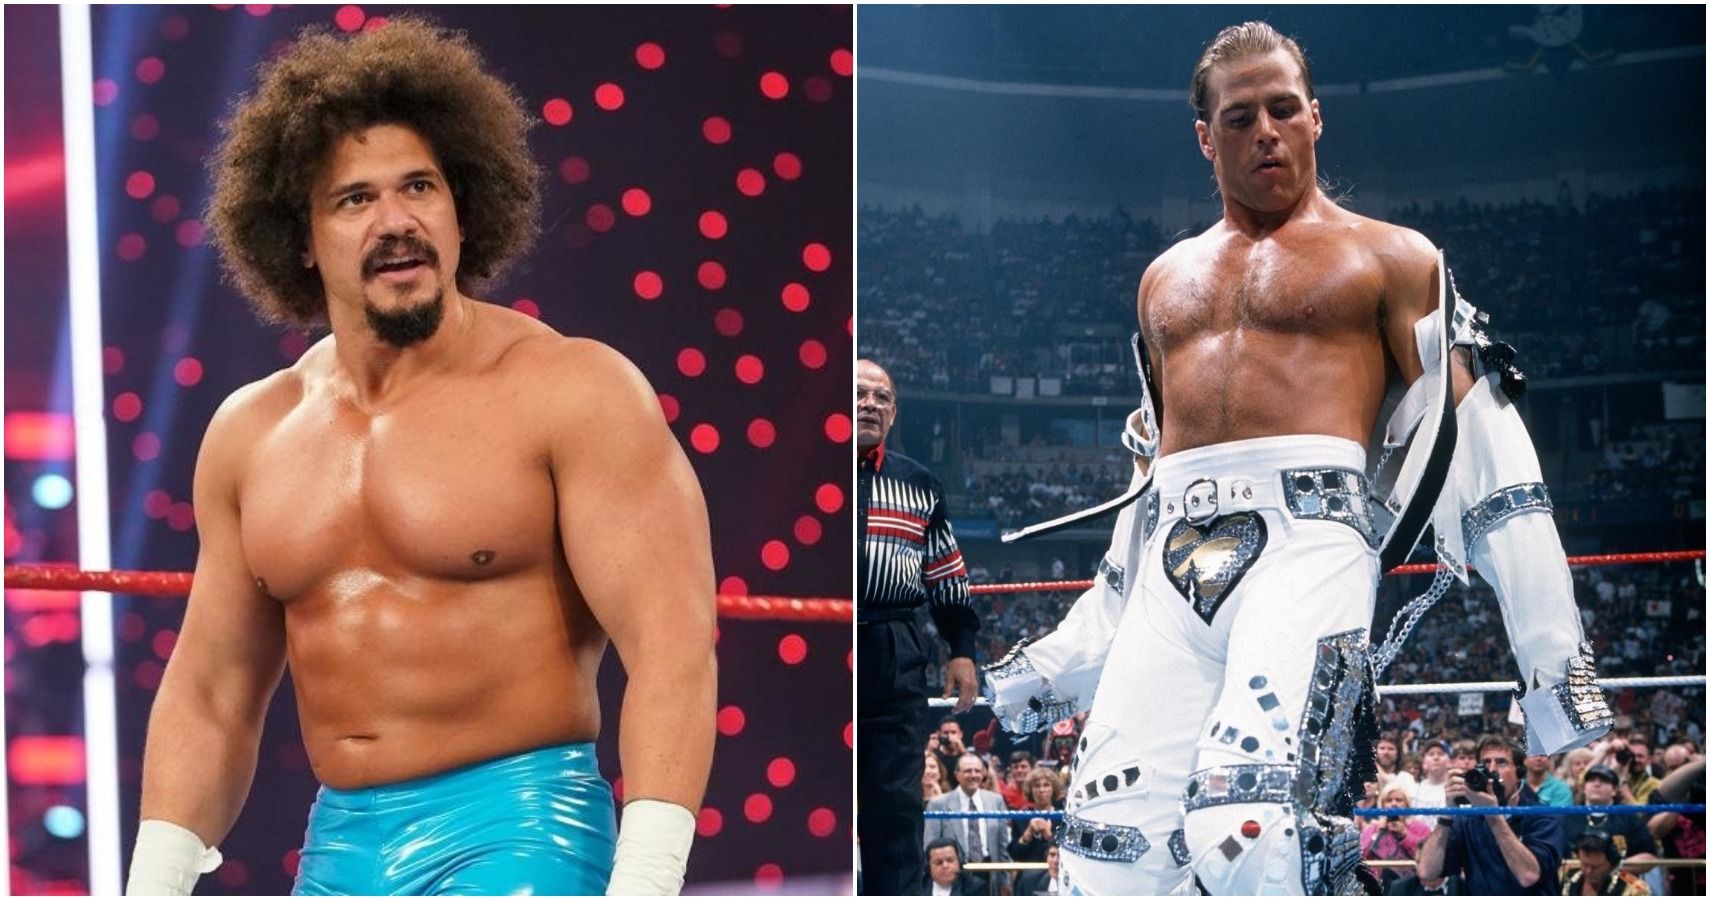 Carlito And Shawn Michaels